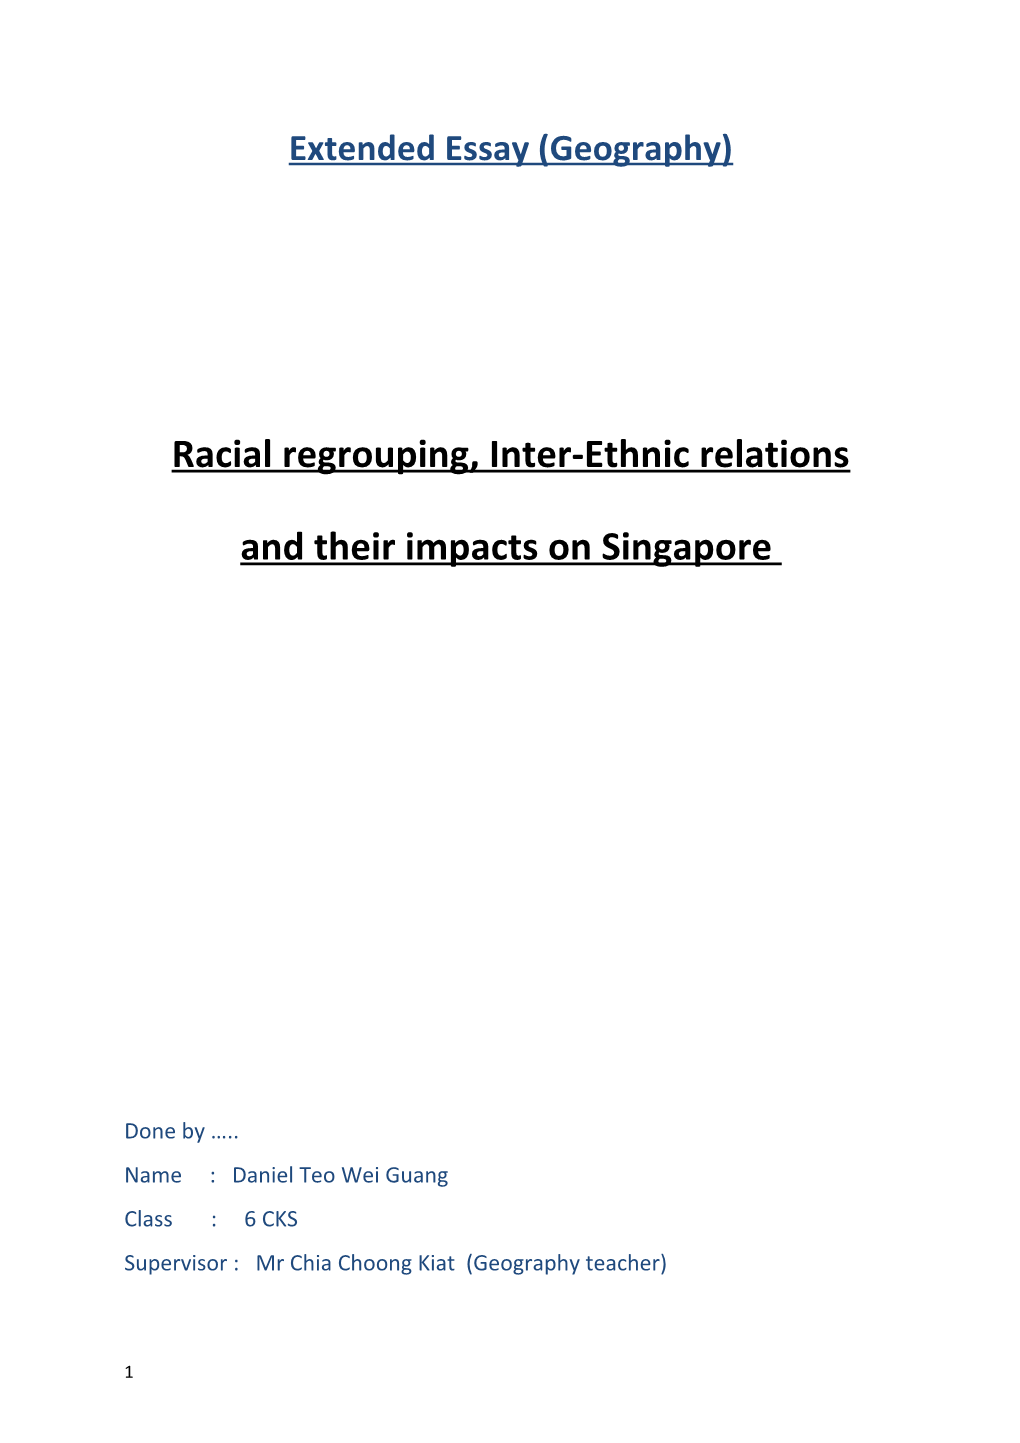 Racial Regrouping, Inter-Ethnic Relations